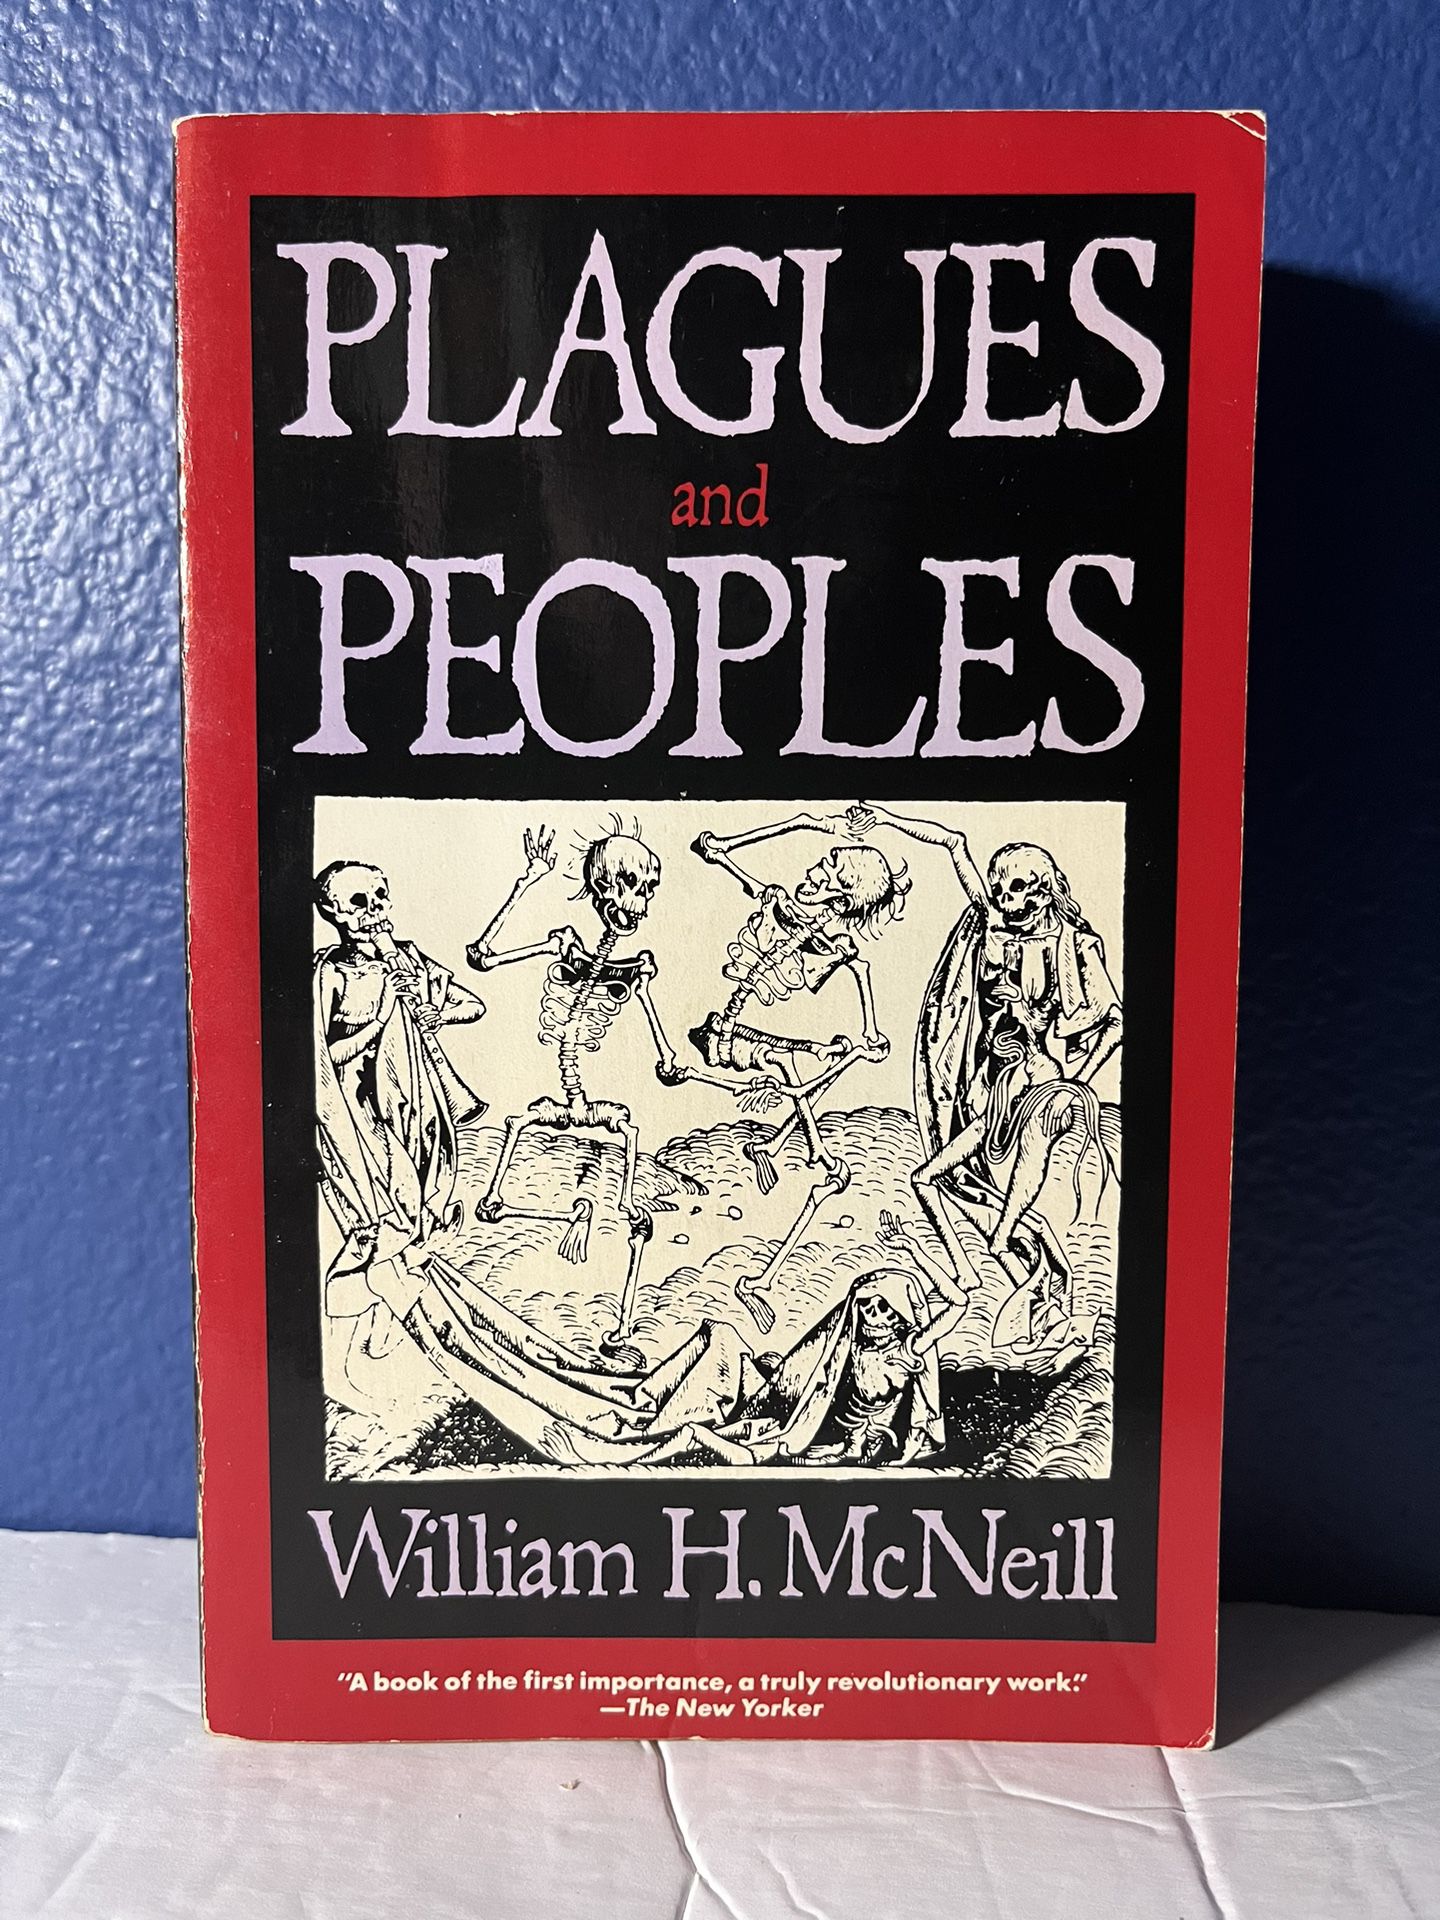 Plagues and Peoples - Book by William H. McNeill